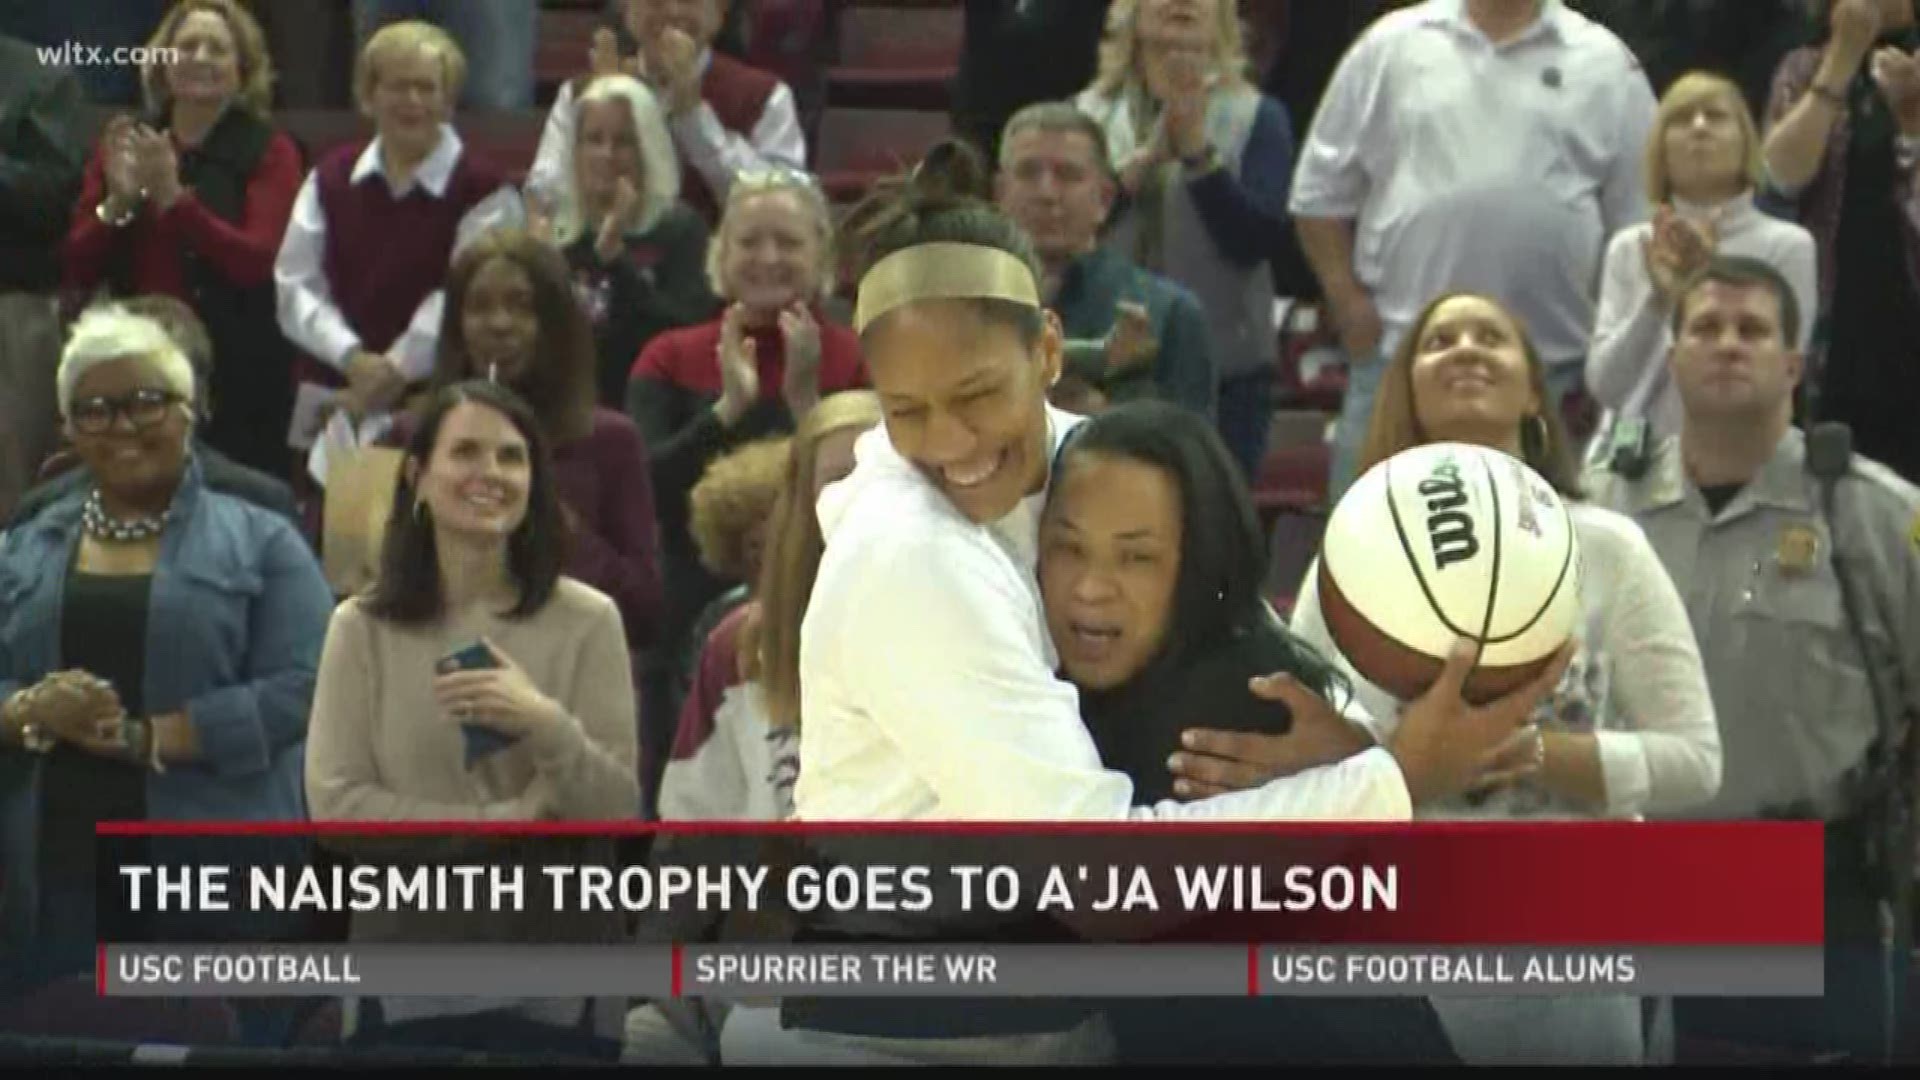 A'ja Wilson is the consensus National Player of the Year after the Atlanta Tipoff Club named her the Naismith Player of the Year.